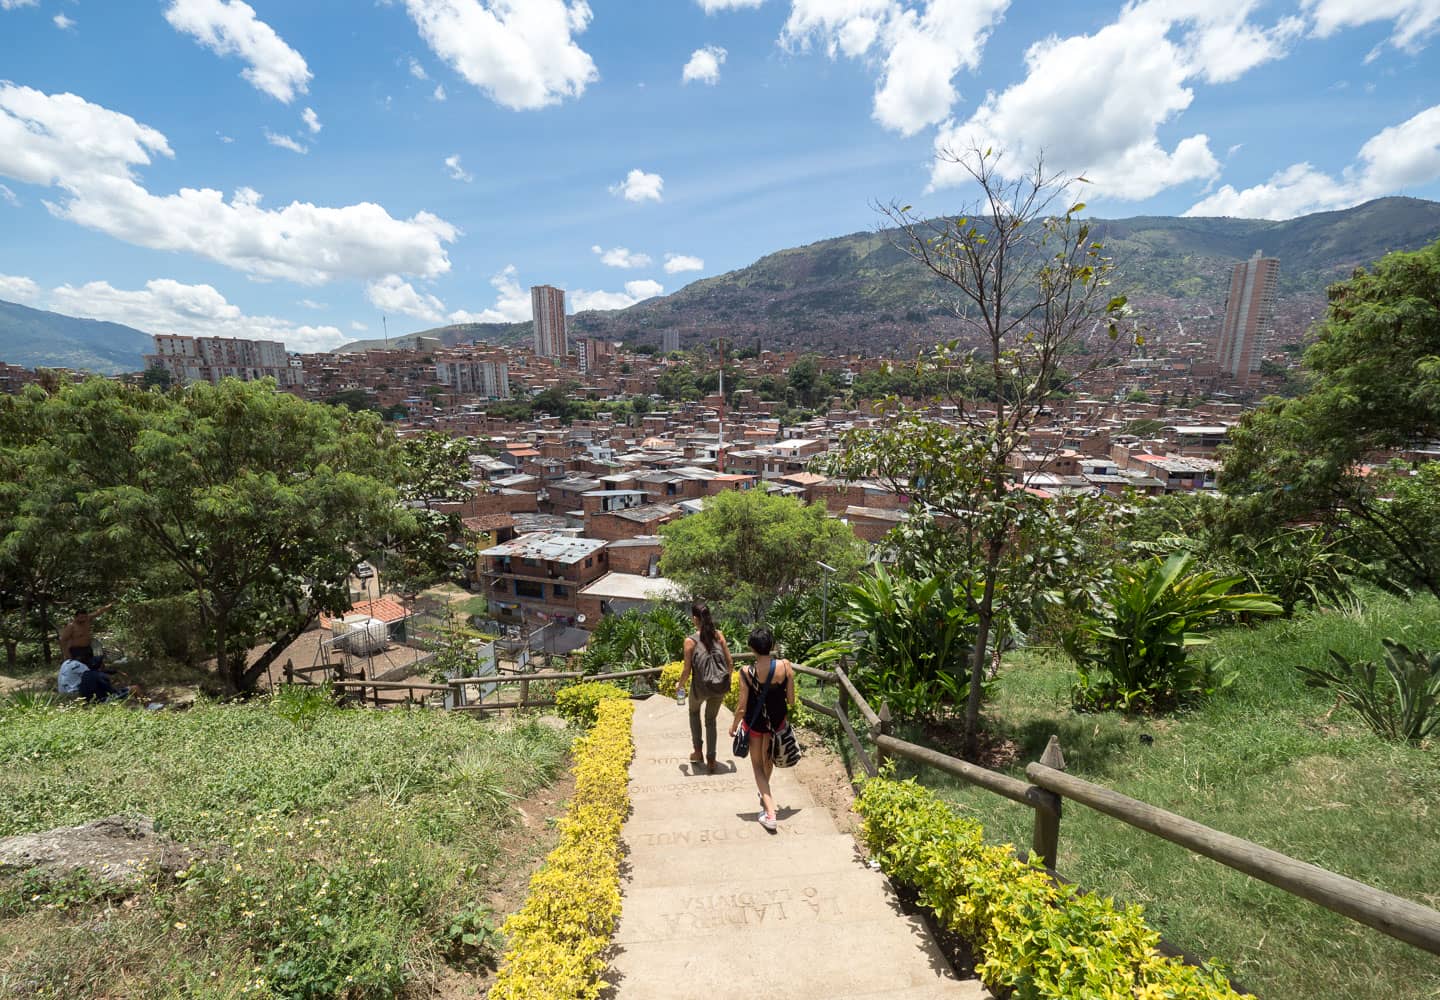 Medellin City Tours and local english tour guides to discover Medellin's region